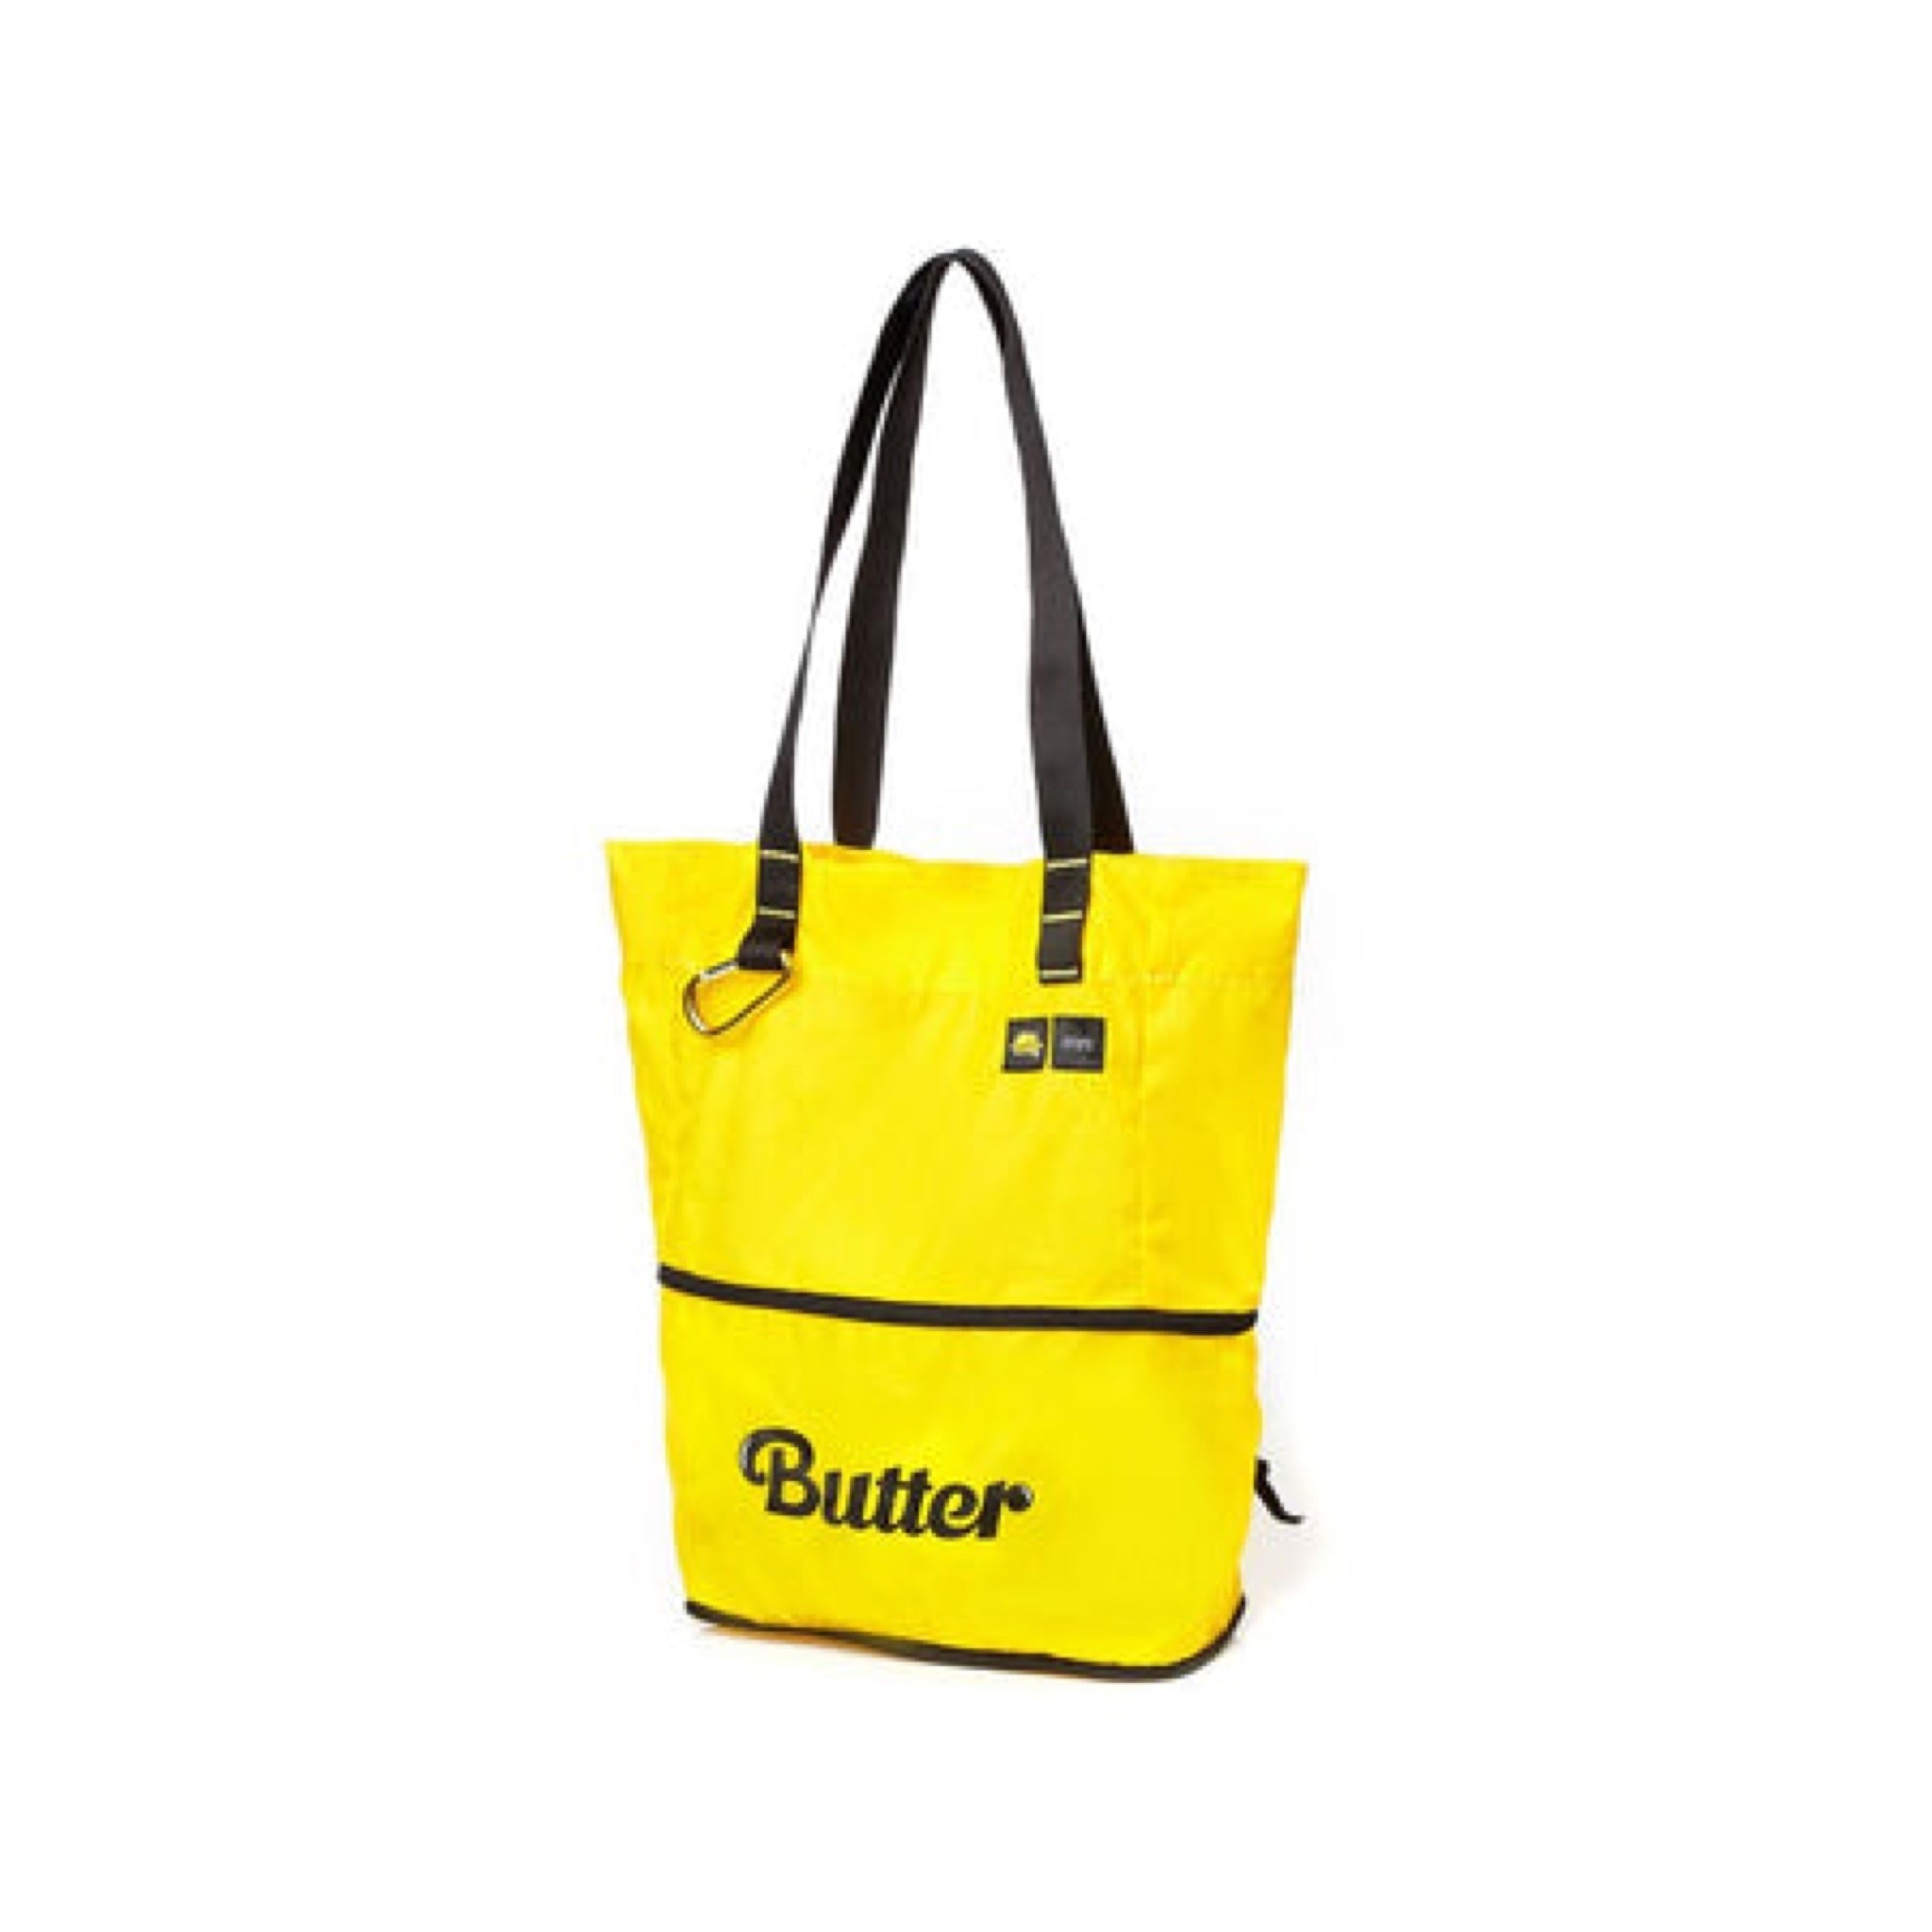 BTS x Samsonite Red Butter Recipe Collection Pouch Bag / Yellow